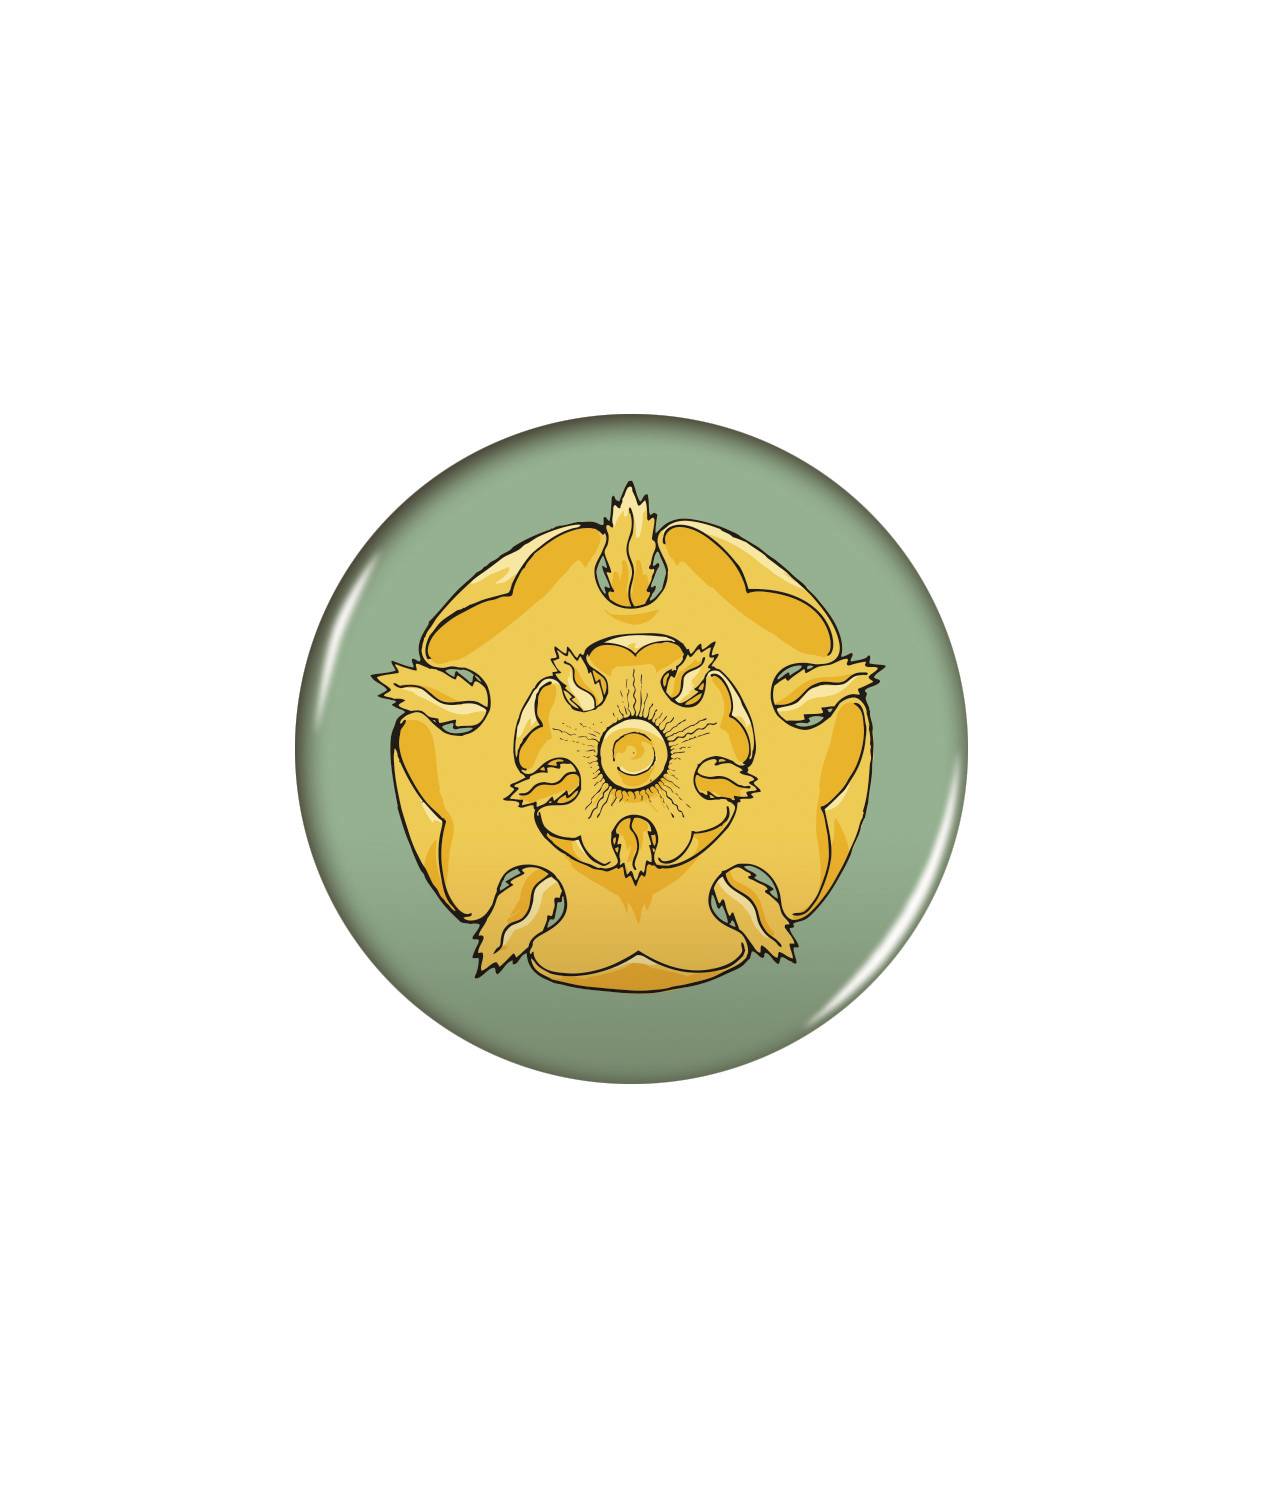 GAME OF THRONES BUTTON TYRELL